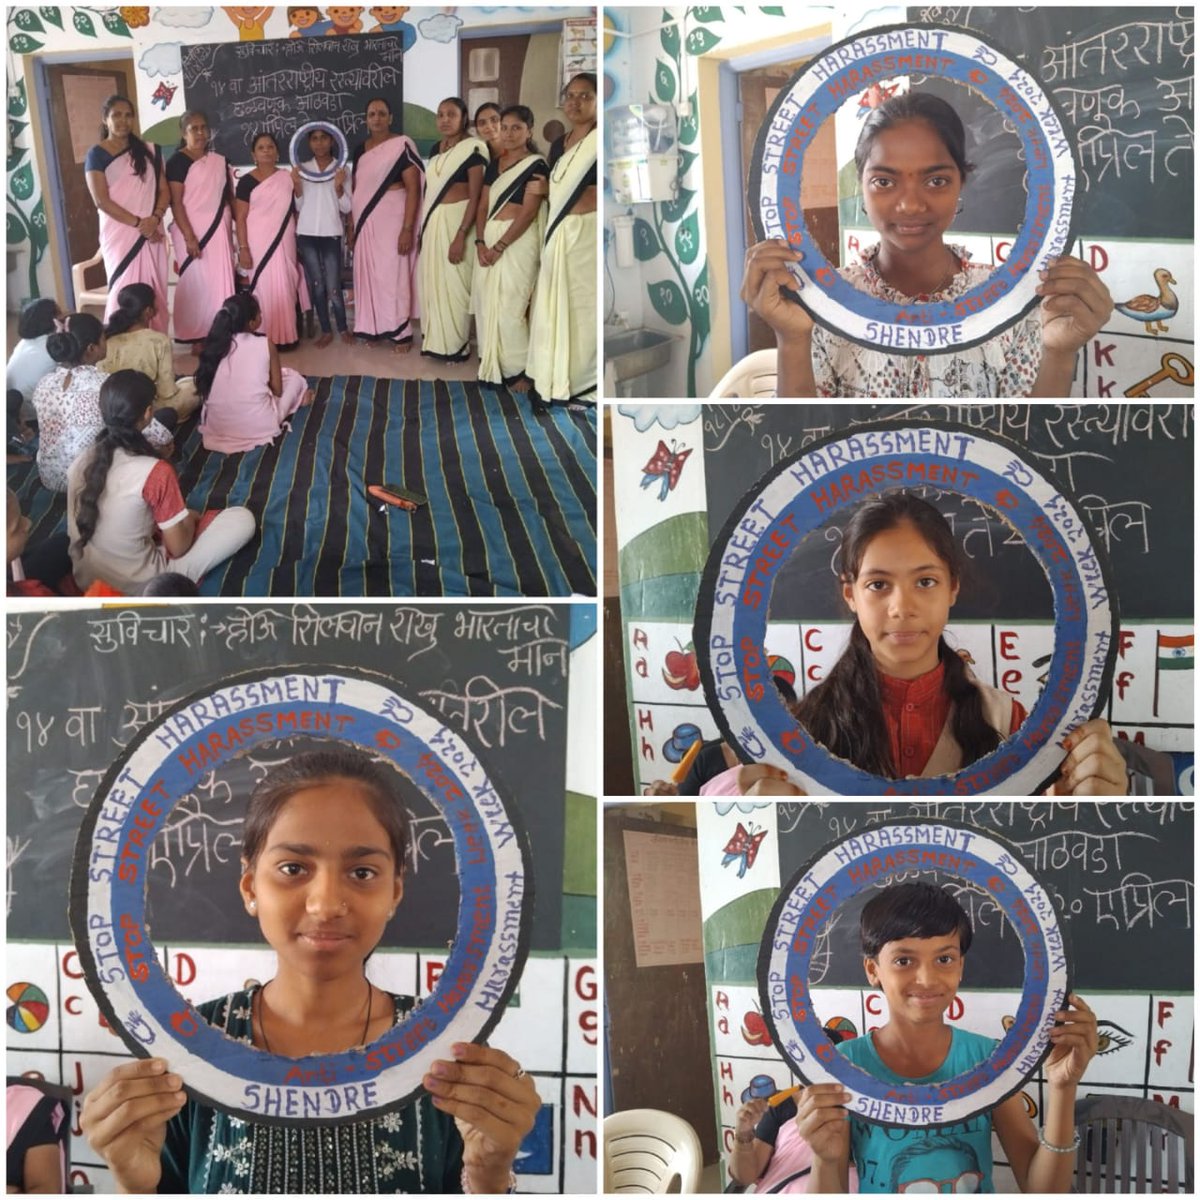 Anganwadi workers in Satara villages took action against street harassment by creating 'Anti Street Harassment photo frames' with their students. Join us in the movement and share your message with us.

#AntiSHWeek2024 #stopstreetharassment

#Safecity #RedDotFoundation